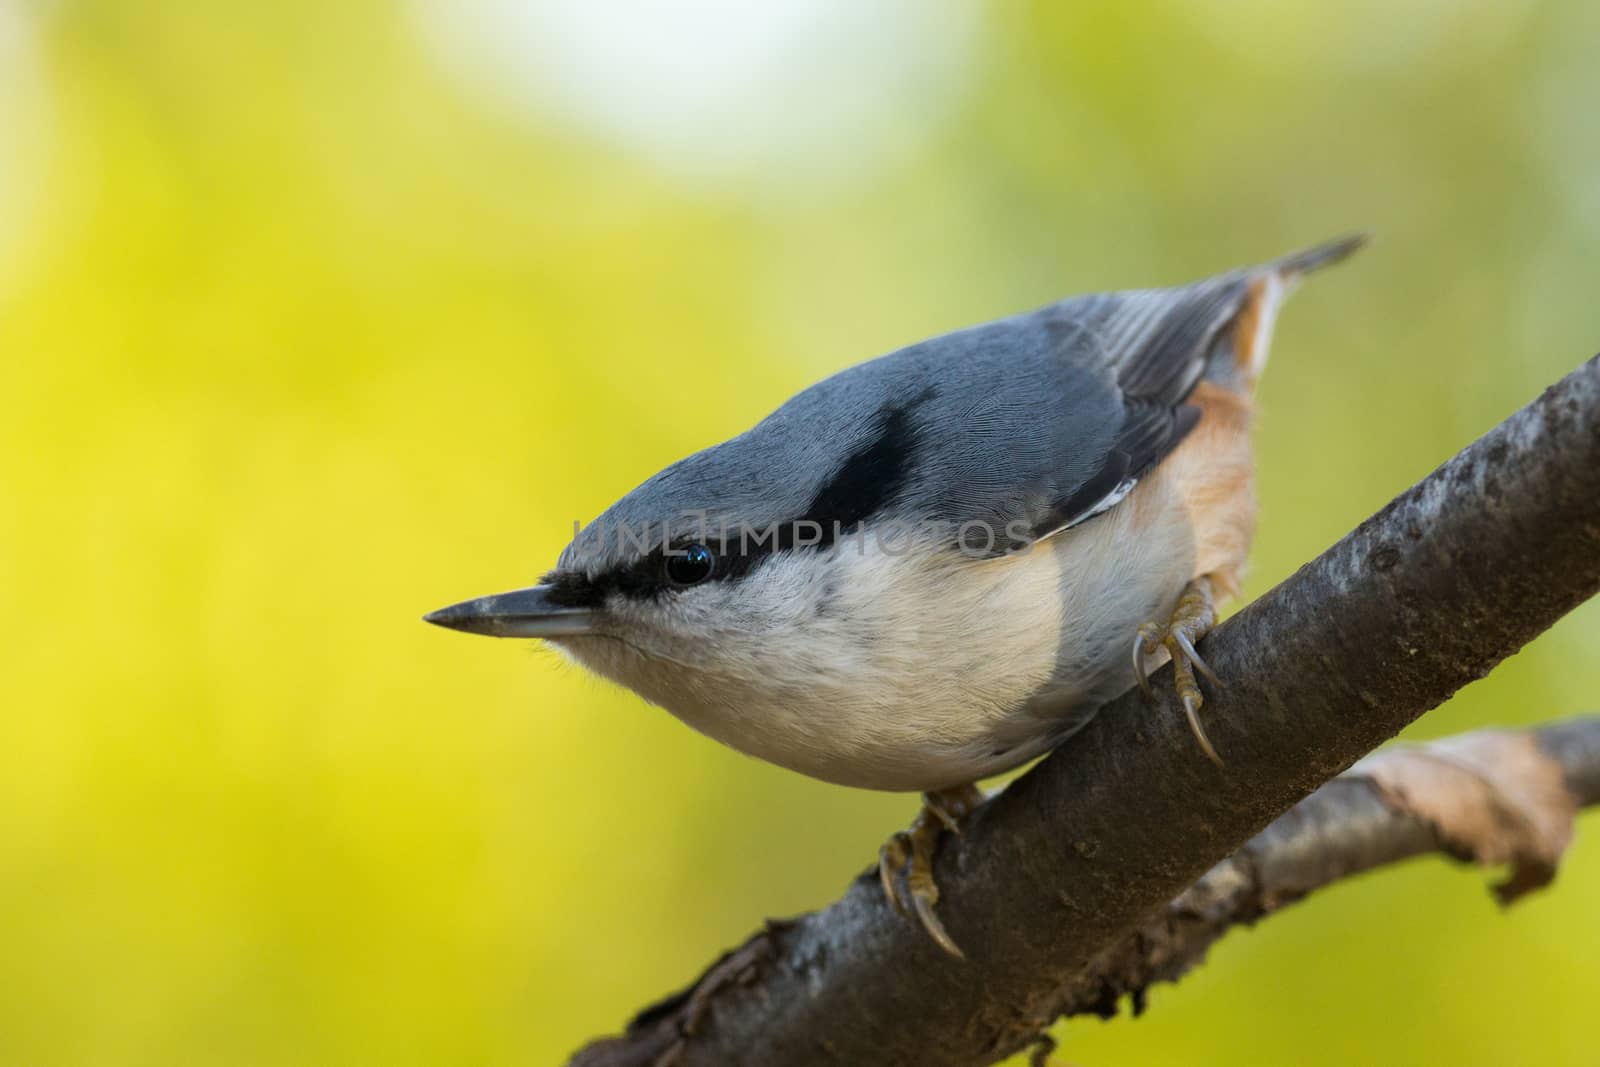 The photo shows a bird nuthatch eats seeds from the hand